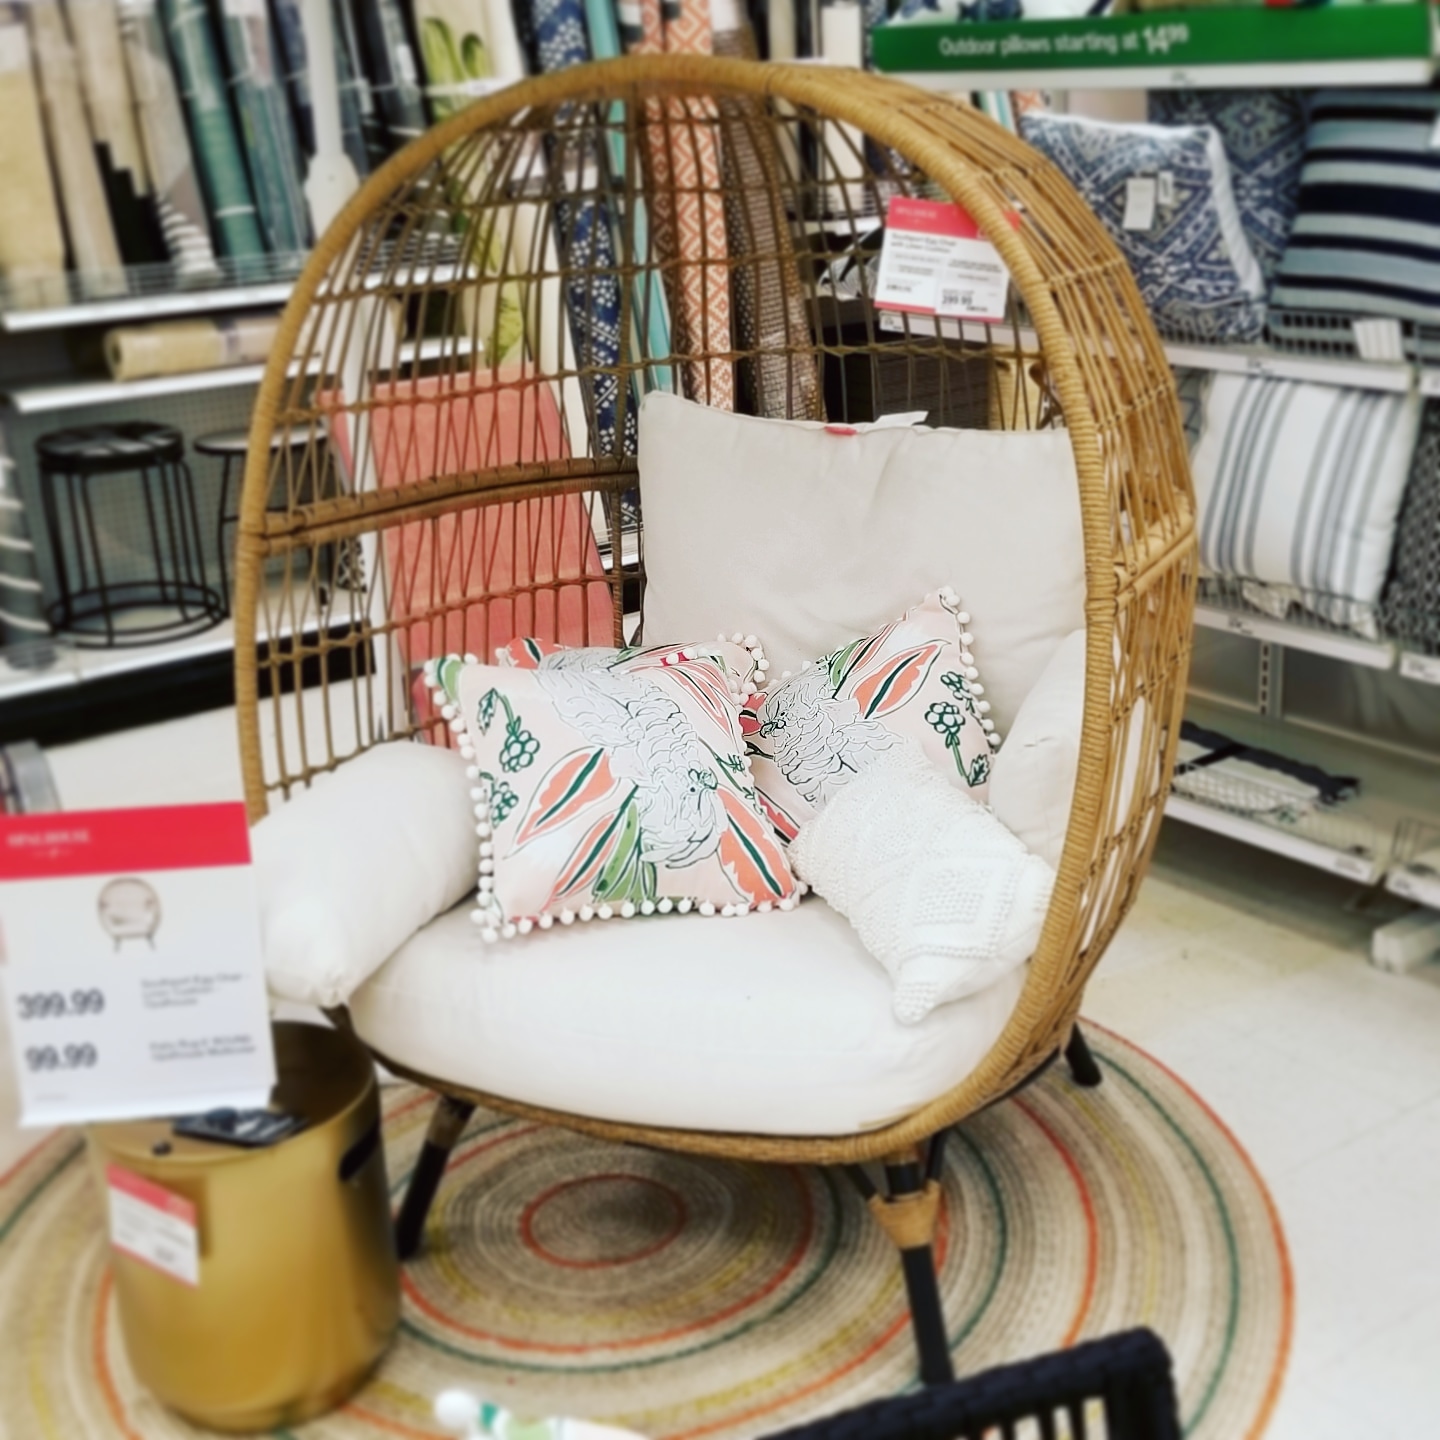 southport patio egg chair